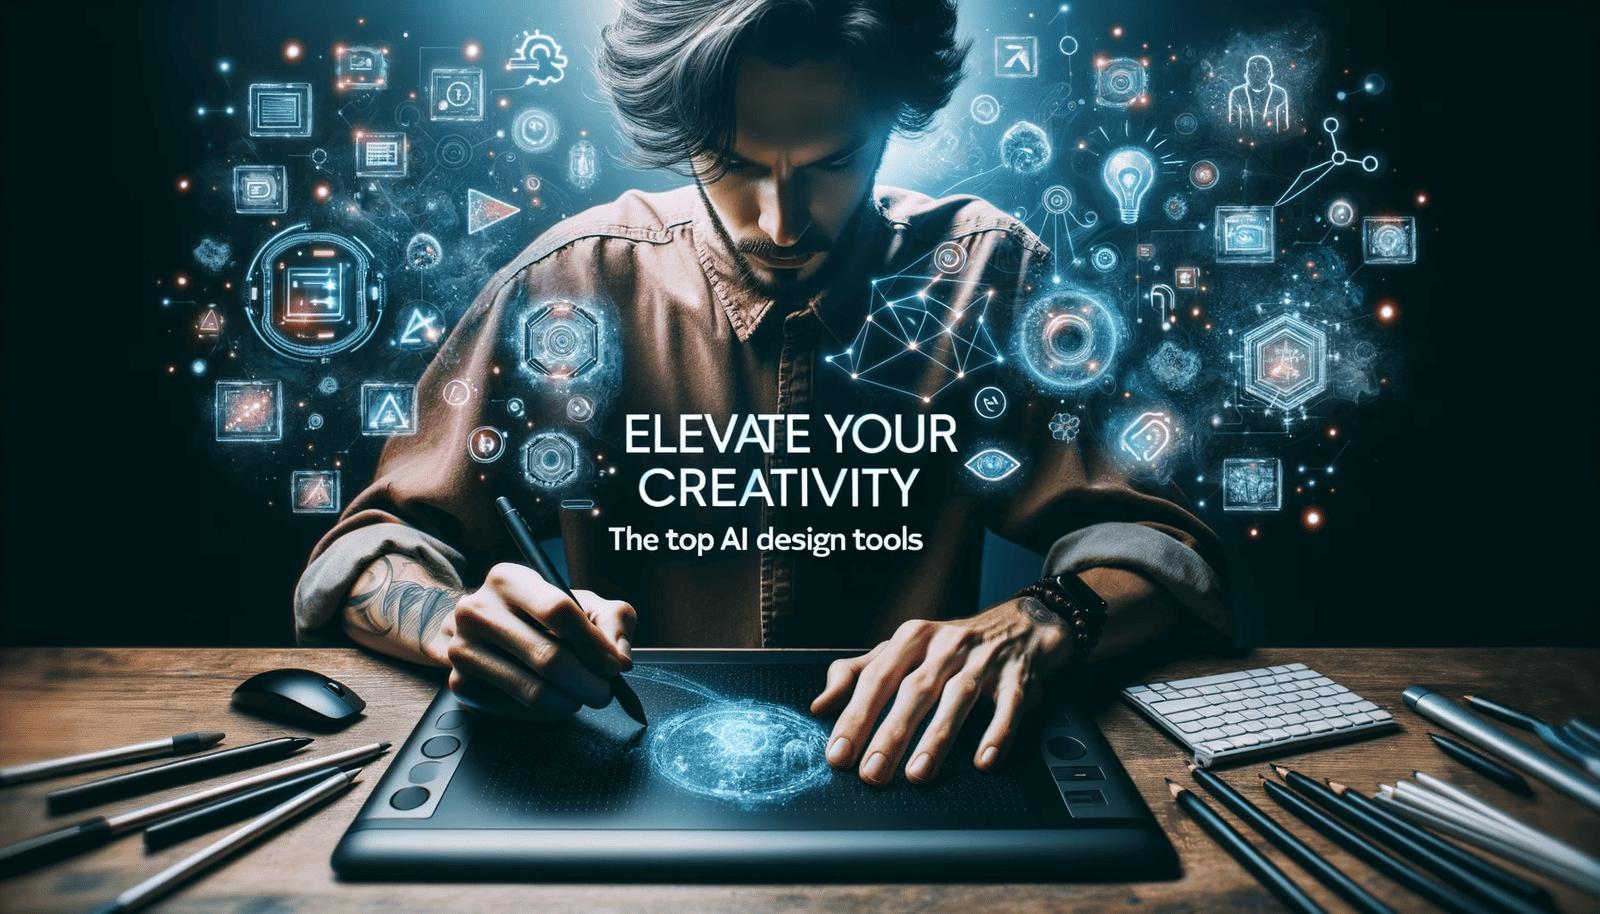 Elevate Your Creativity: The Top 11 AI Design Tools